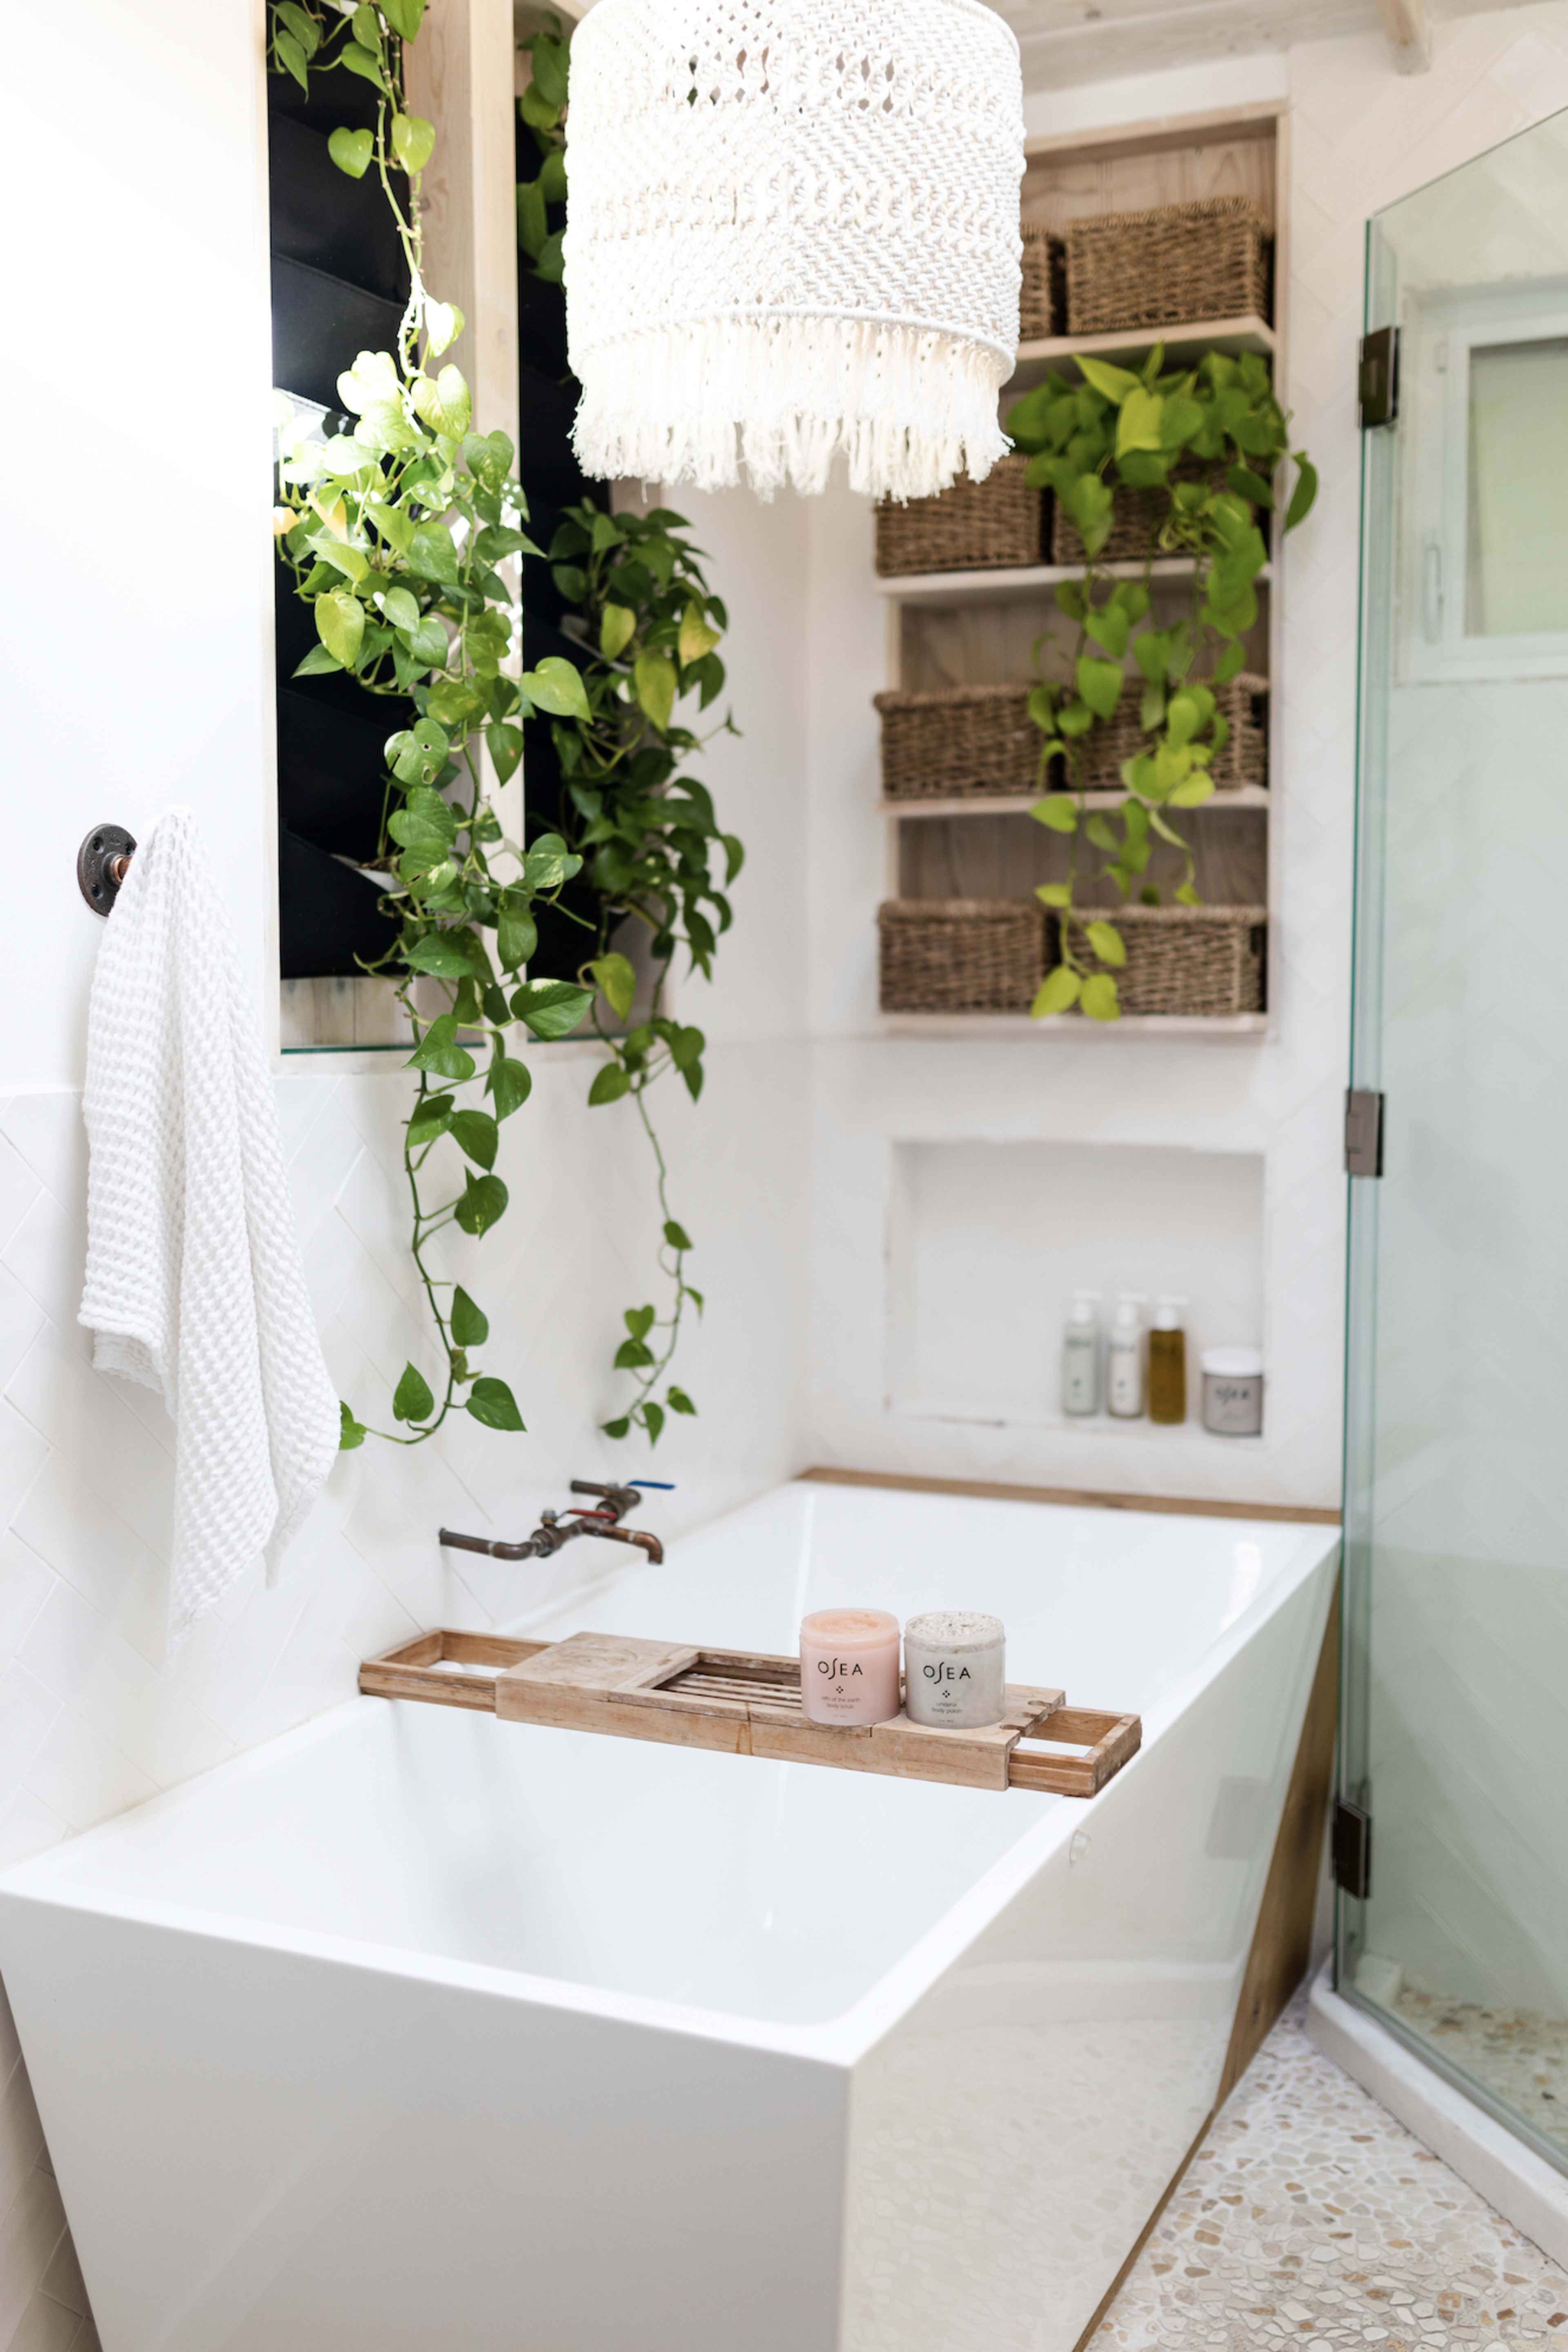 A photoshoot of a white bathtub and shower surrounded by plants.